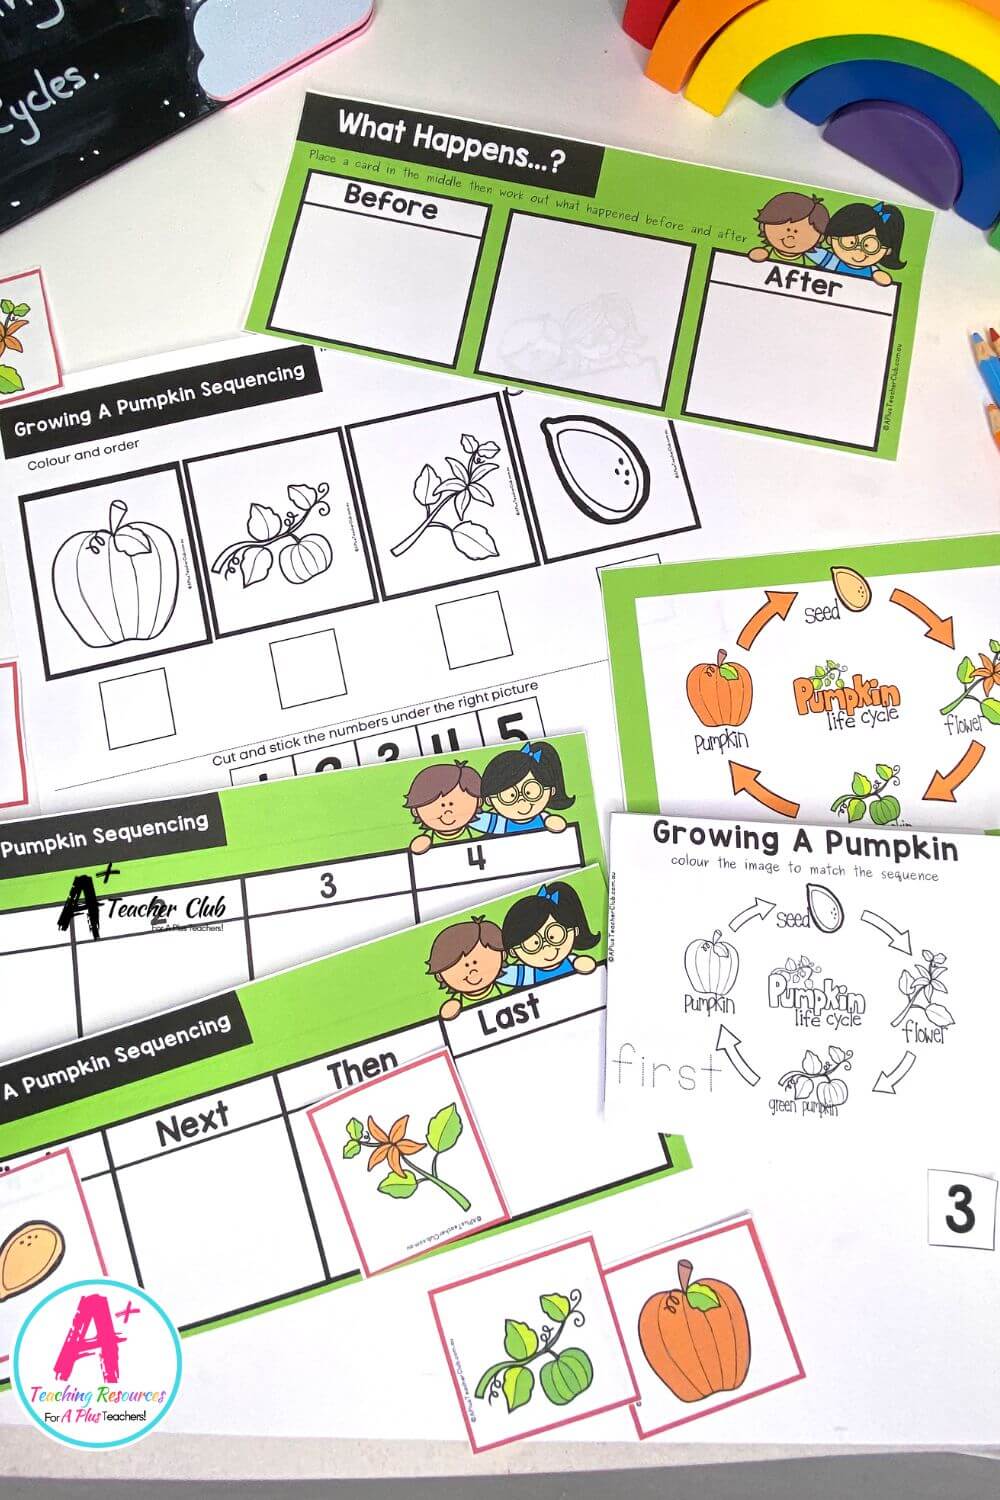 Life Cycle Sequencing 4 Steps - Pumpkin Activities Pack